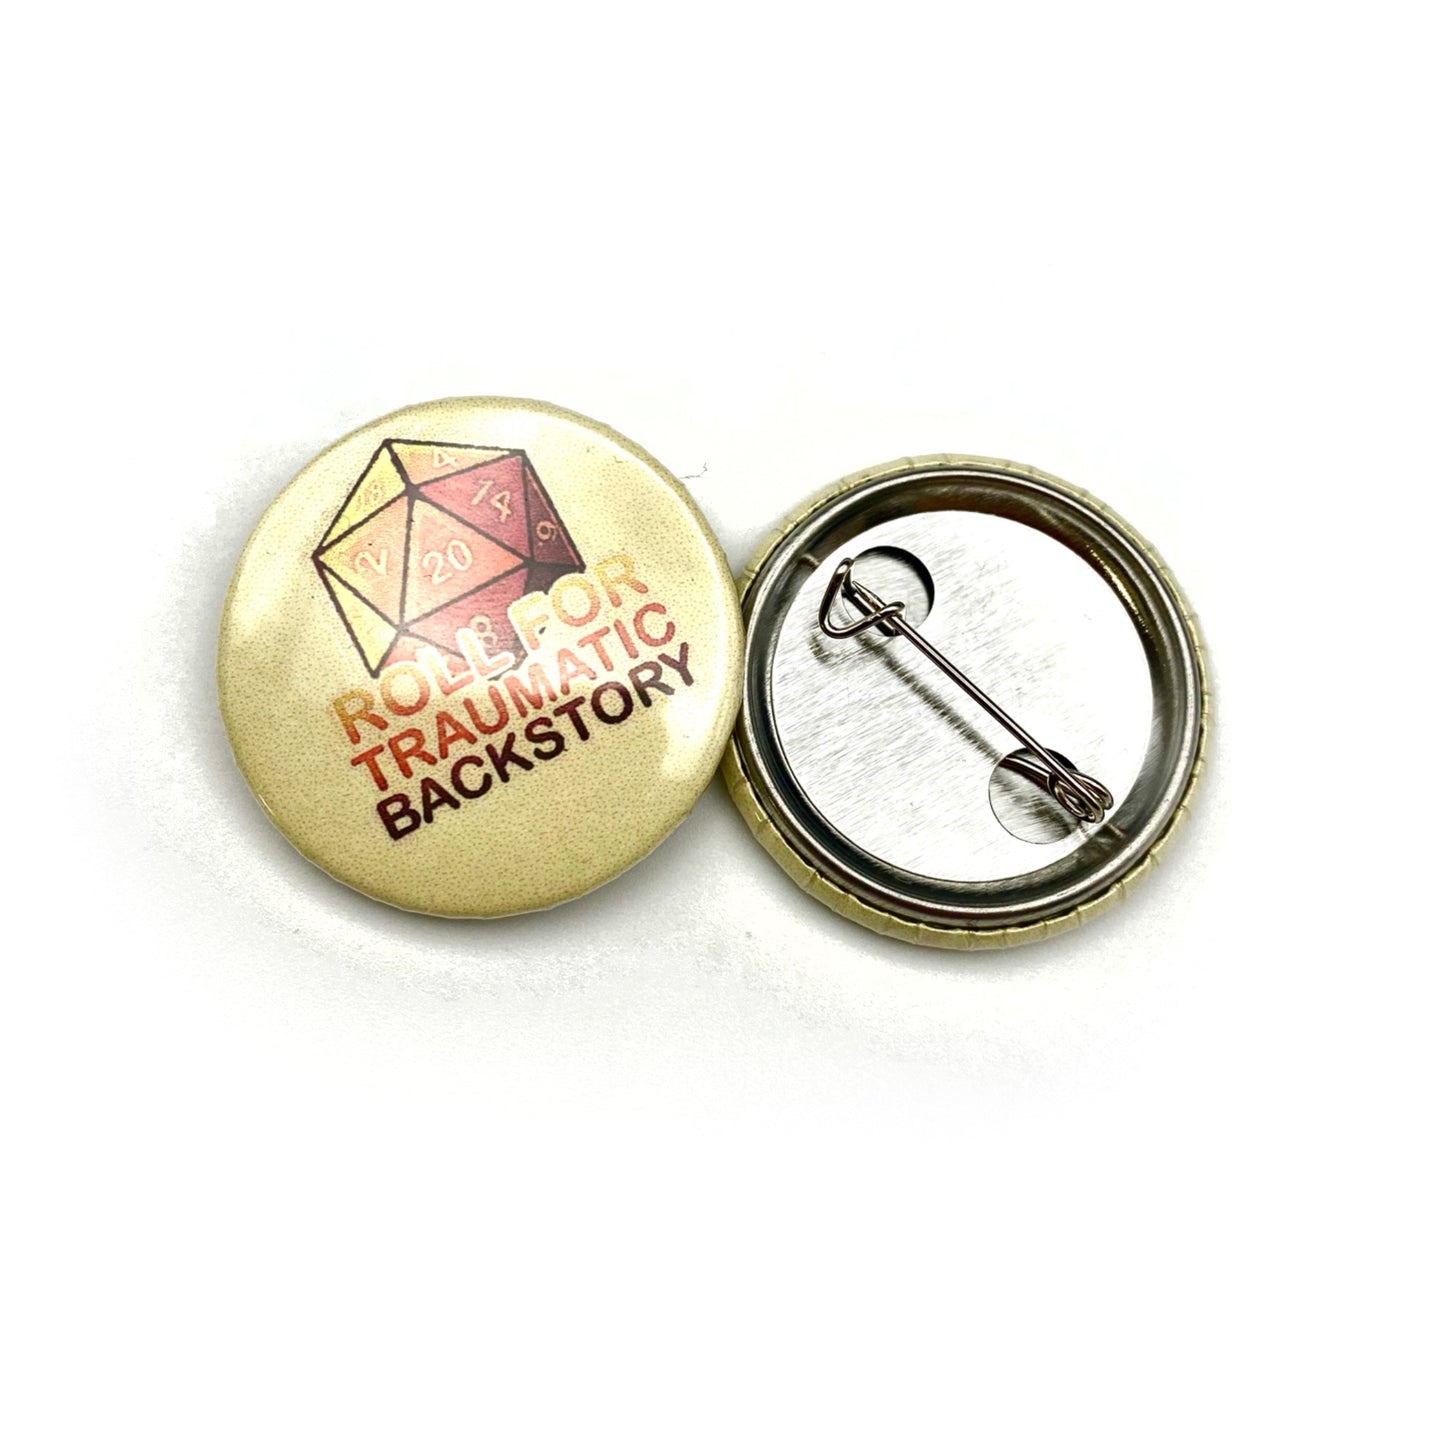 Roll for Traumatic Backstory Button Pin